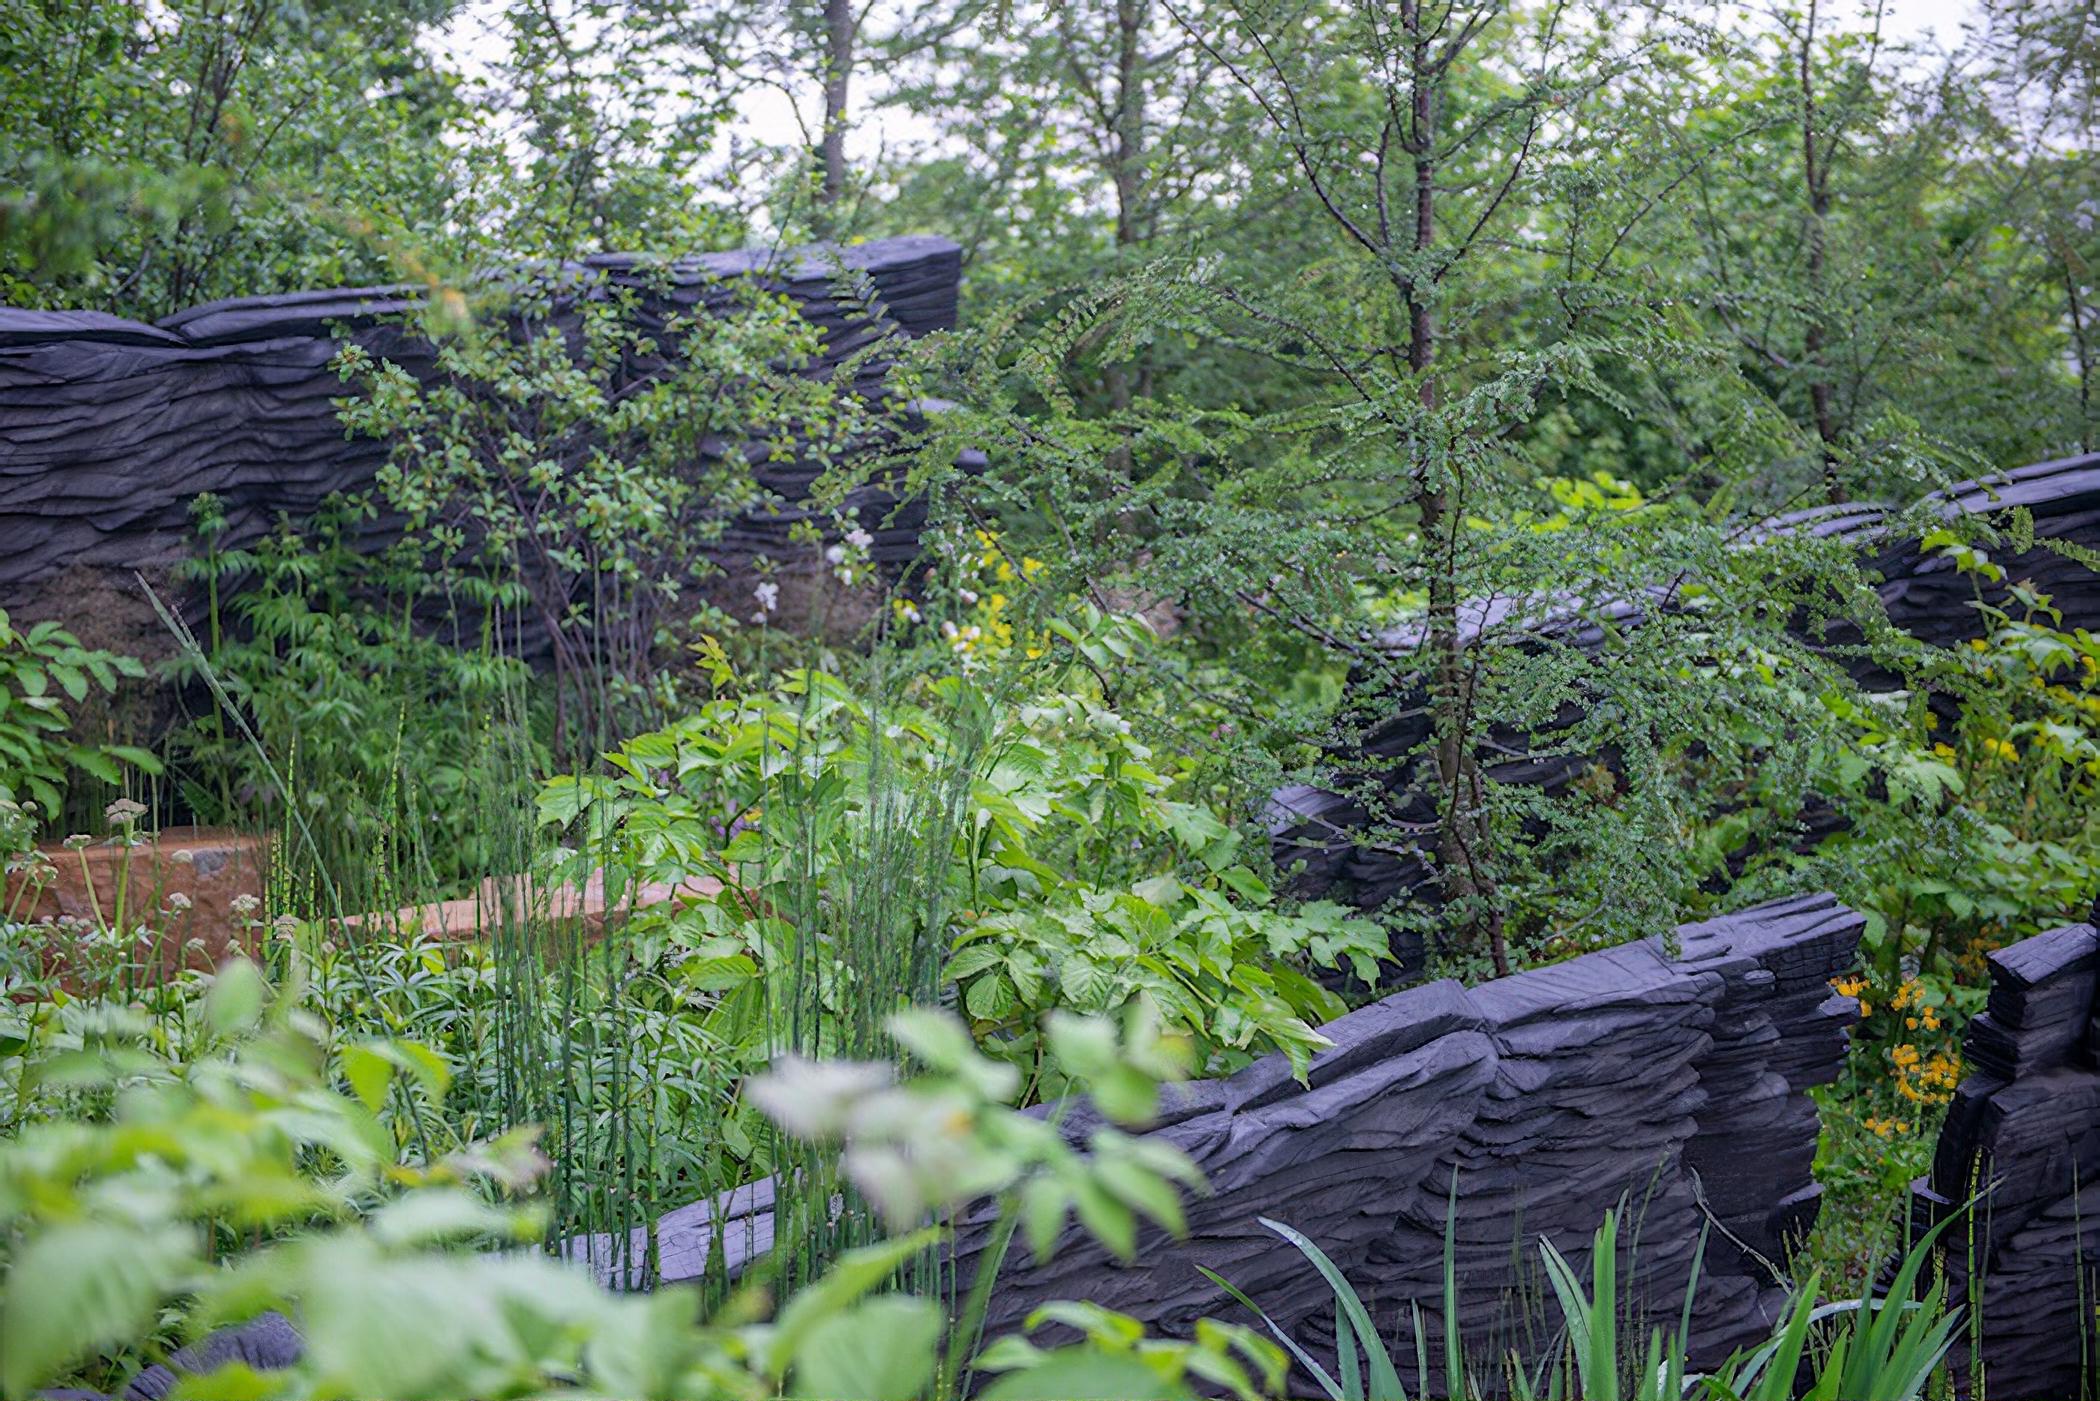 M&G Investments, the title sponsor of the RHS Chelsea Flower Show, has commissioned designer Andy Sturgeon to create The M&G Garden for 2019’s Show.